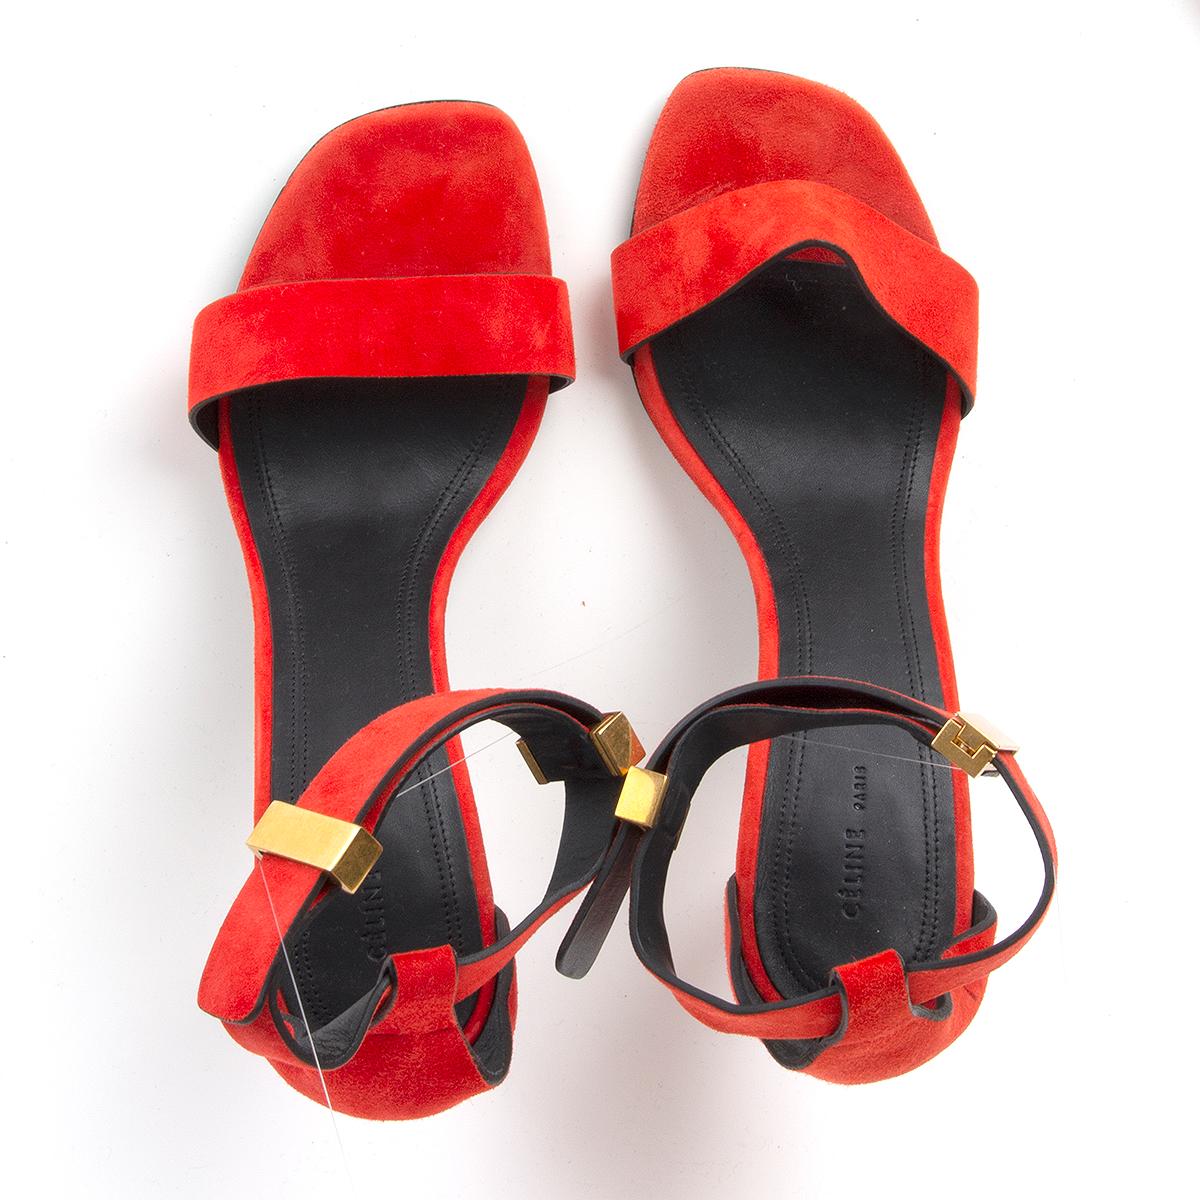 Red CELINE red suede Ankle Strap Sandals Shoes 38.5